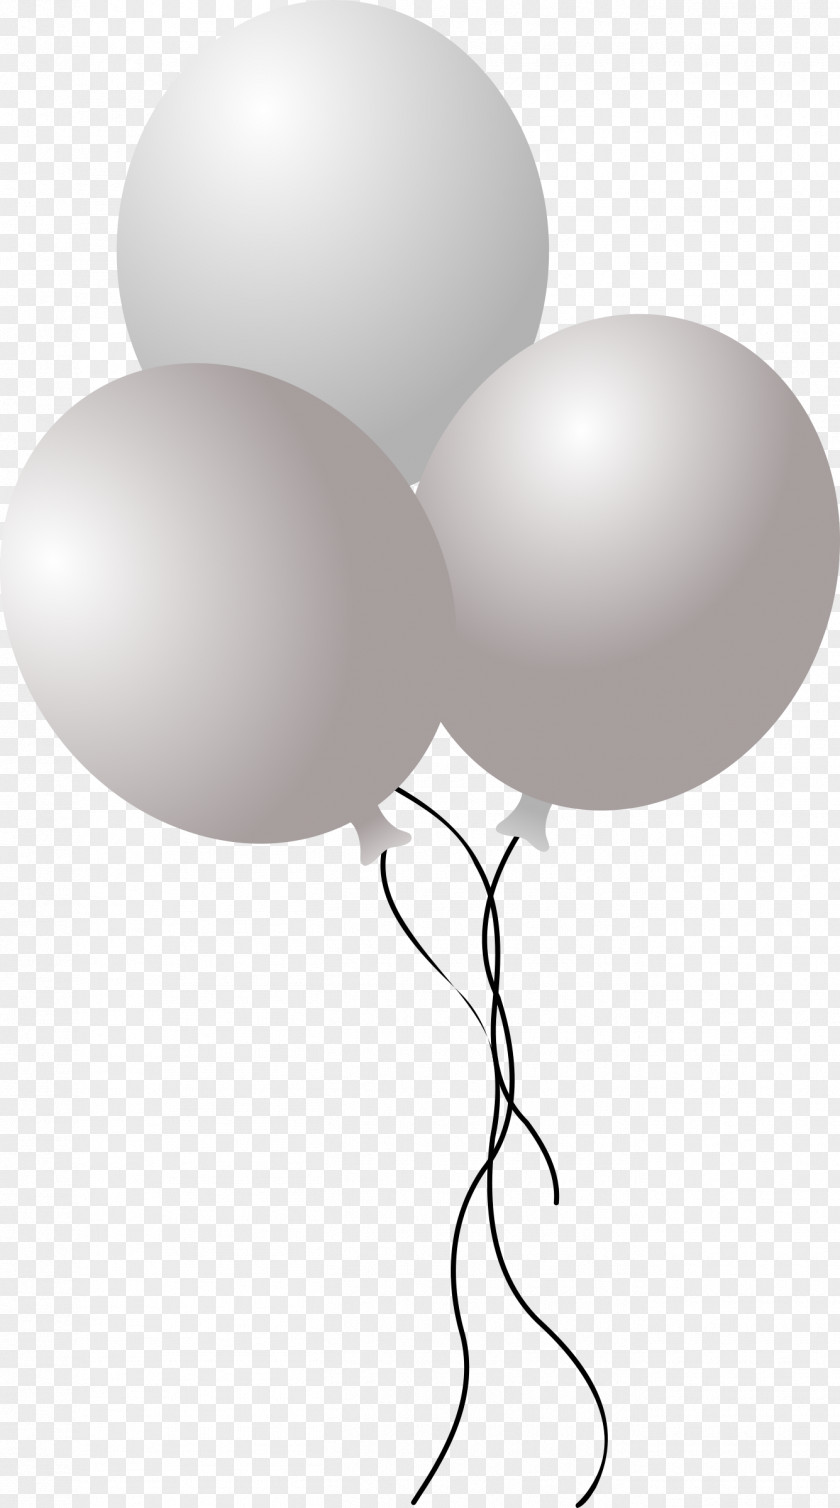 Gold Balloon Party Birthday Clip Art PNG